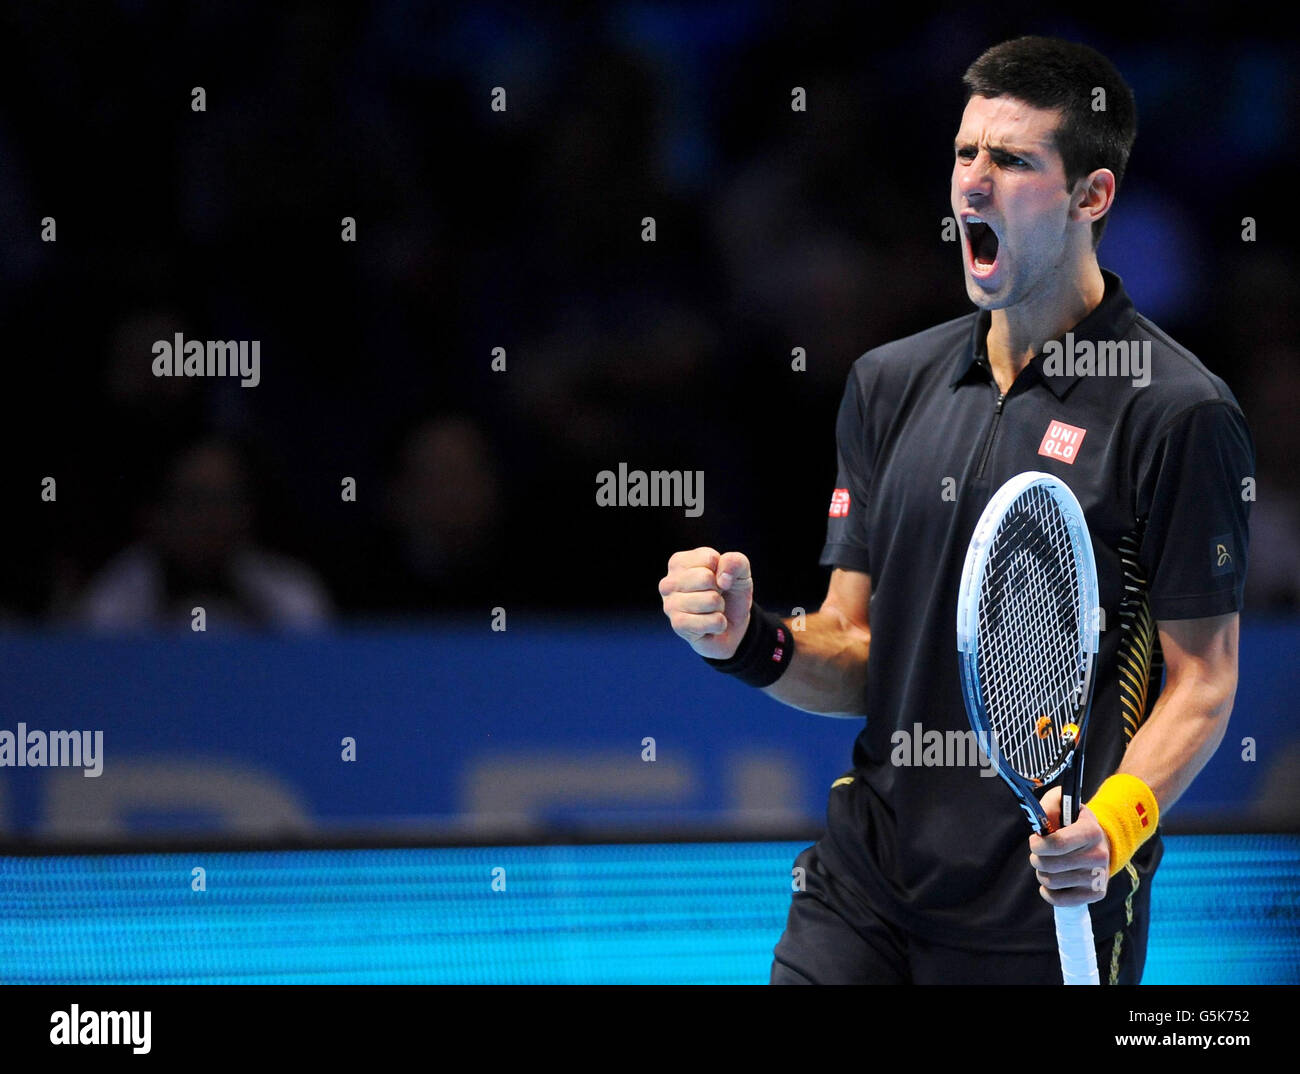 Serbia's Novak Djokovic celebrates winning a point during his match against Great Britain's Andy Murray during the Barclays ATP World Tour Finals at the O2 Arena, London. Stock Photo